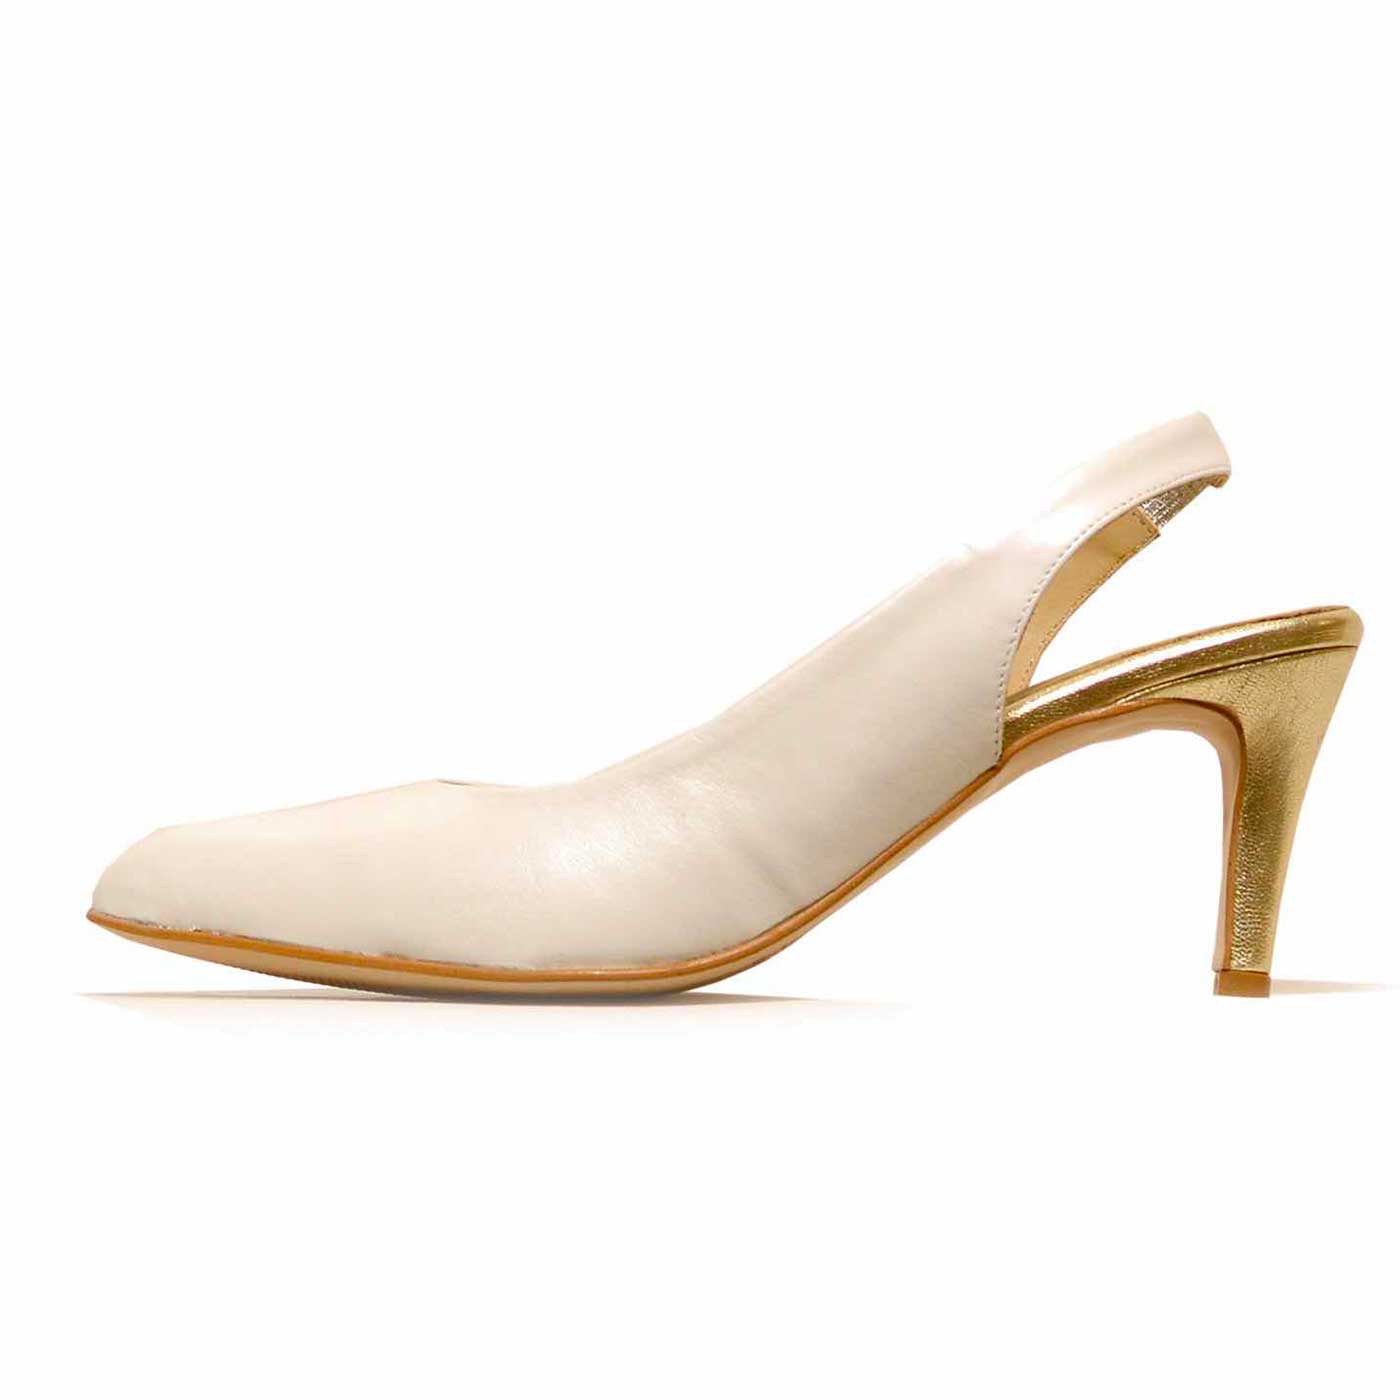 sandales cuir lisse blanc, chaussures femme grande taille